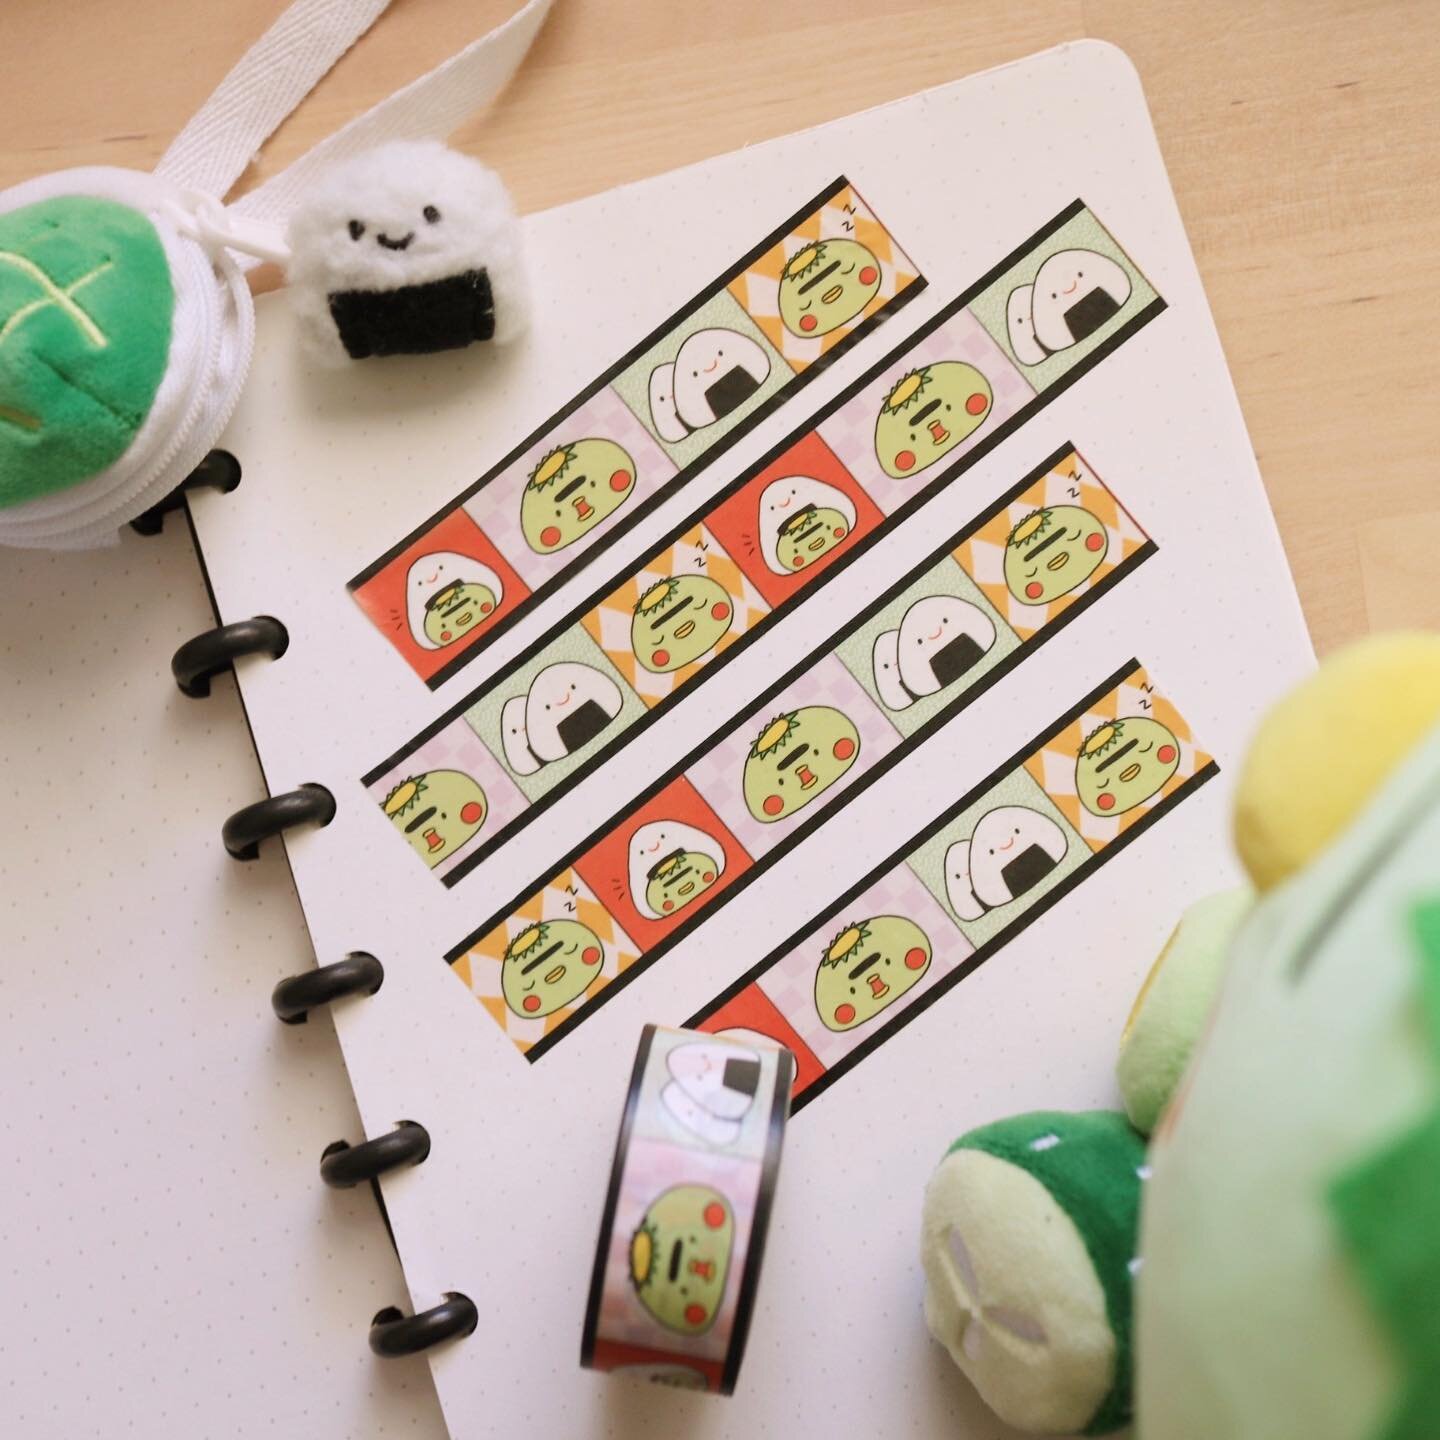 I hope you are all ready for tomorrow&rsquo;s shop drop! This is probably the biggest drop I&rsquo;ve ever done - so many new goodies including my very first washi tape featuring Hungry Kappa! 💚 A full shop drop preview is now posted on my story, do